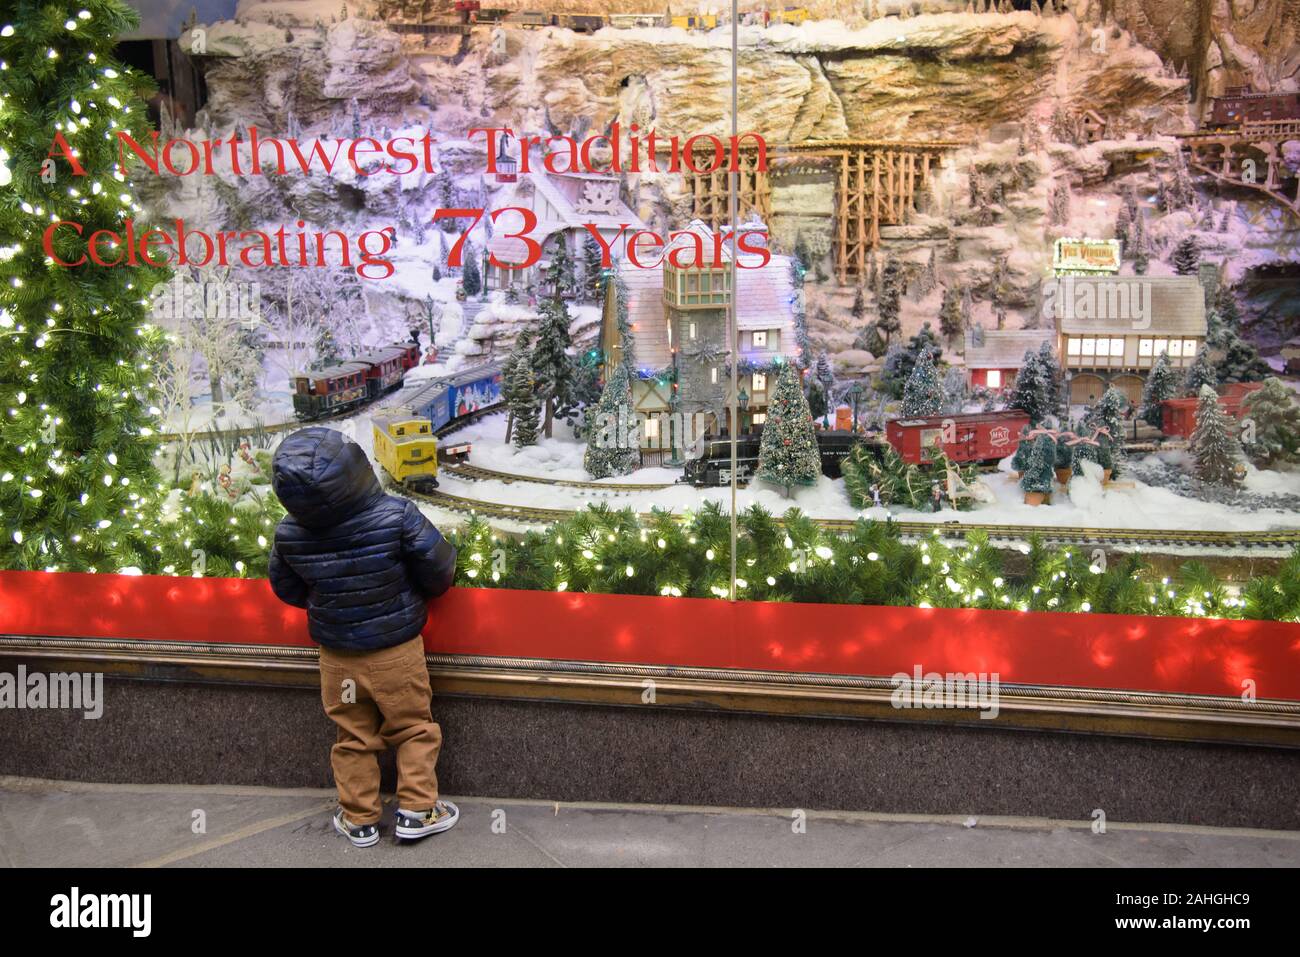 Child gazes in wonder at Macy's final store window display decorated for Christmas in downtown Seattle. Macy's is closing, ending a 73-year tradition. Stock Photo